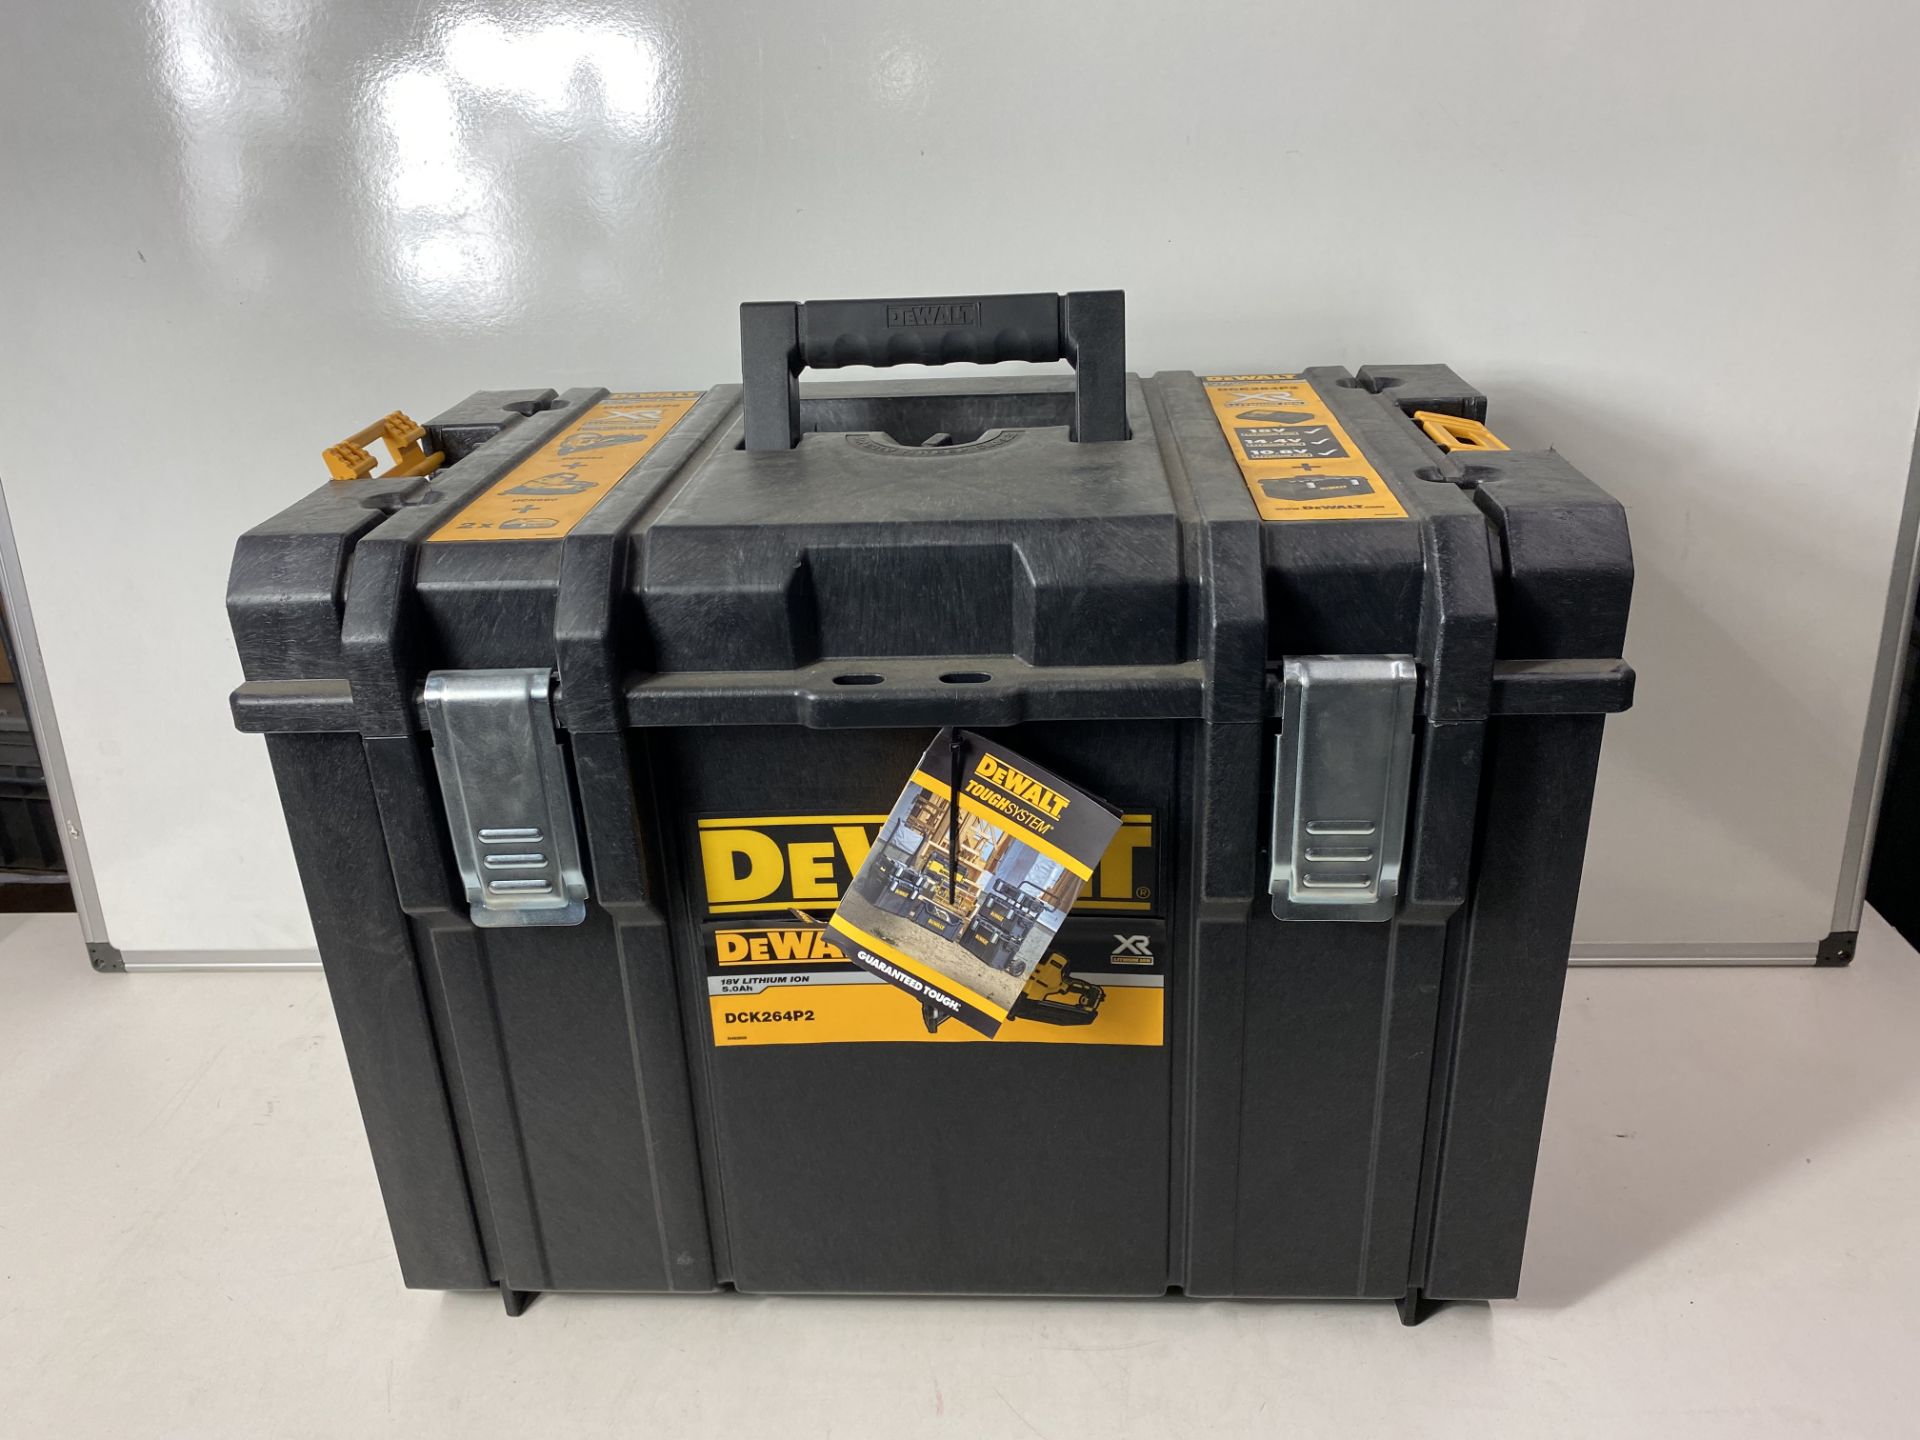 DEWALT DCK264P2 XR NAILER TWIN PACK CASE (Nailer Not Included JUST THE CASE!)